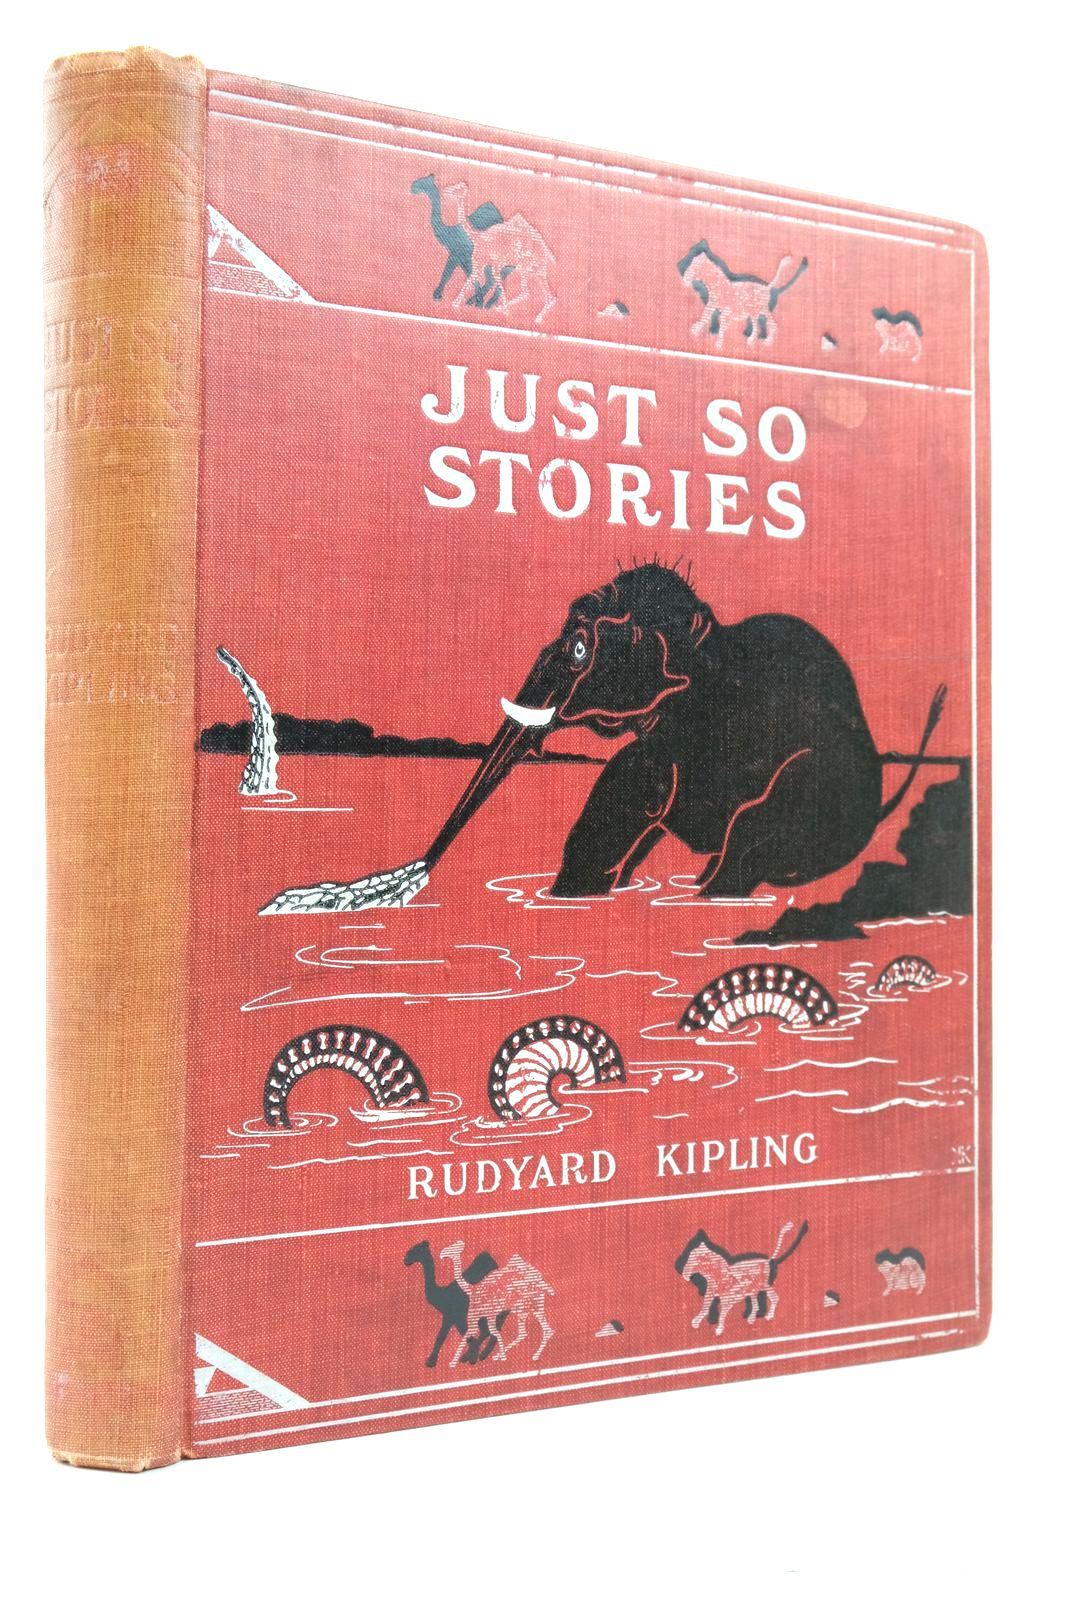 Photo of JUST SO STORIES written by Kipling, Rudyard illustrated by Kipling, Rudyard published by Macmillan &amp; Co. Ltd. (STOCK CODE: 2138093)  for sale by Stella & Rose's Books